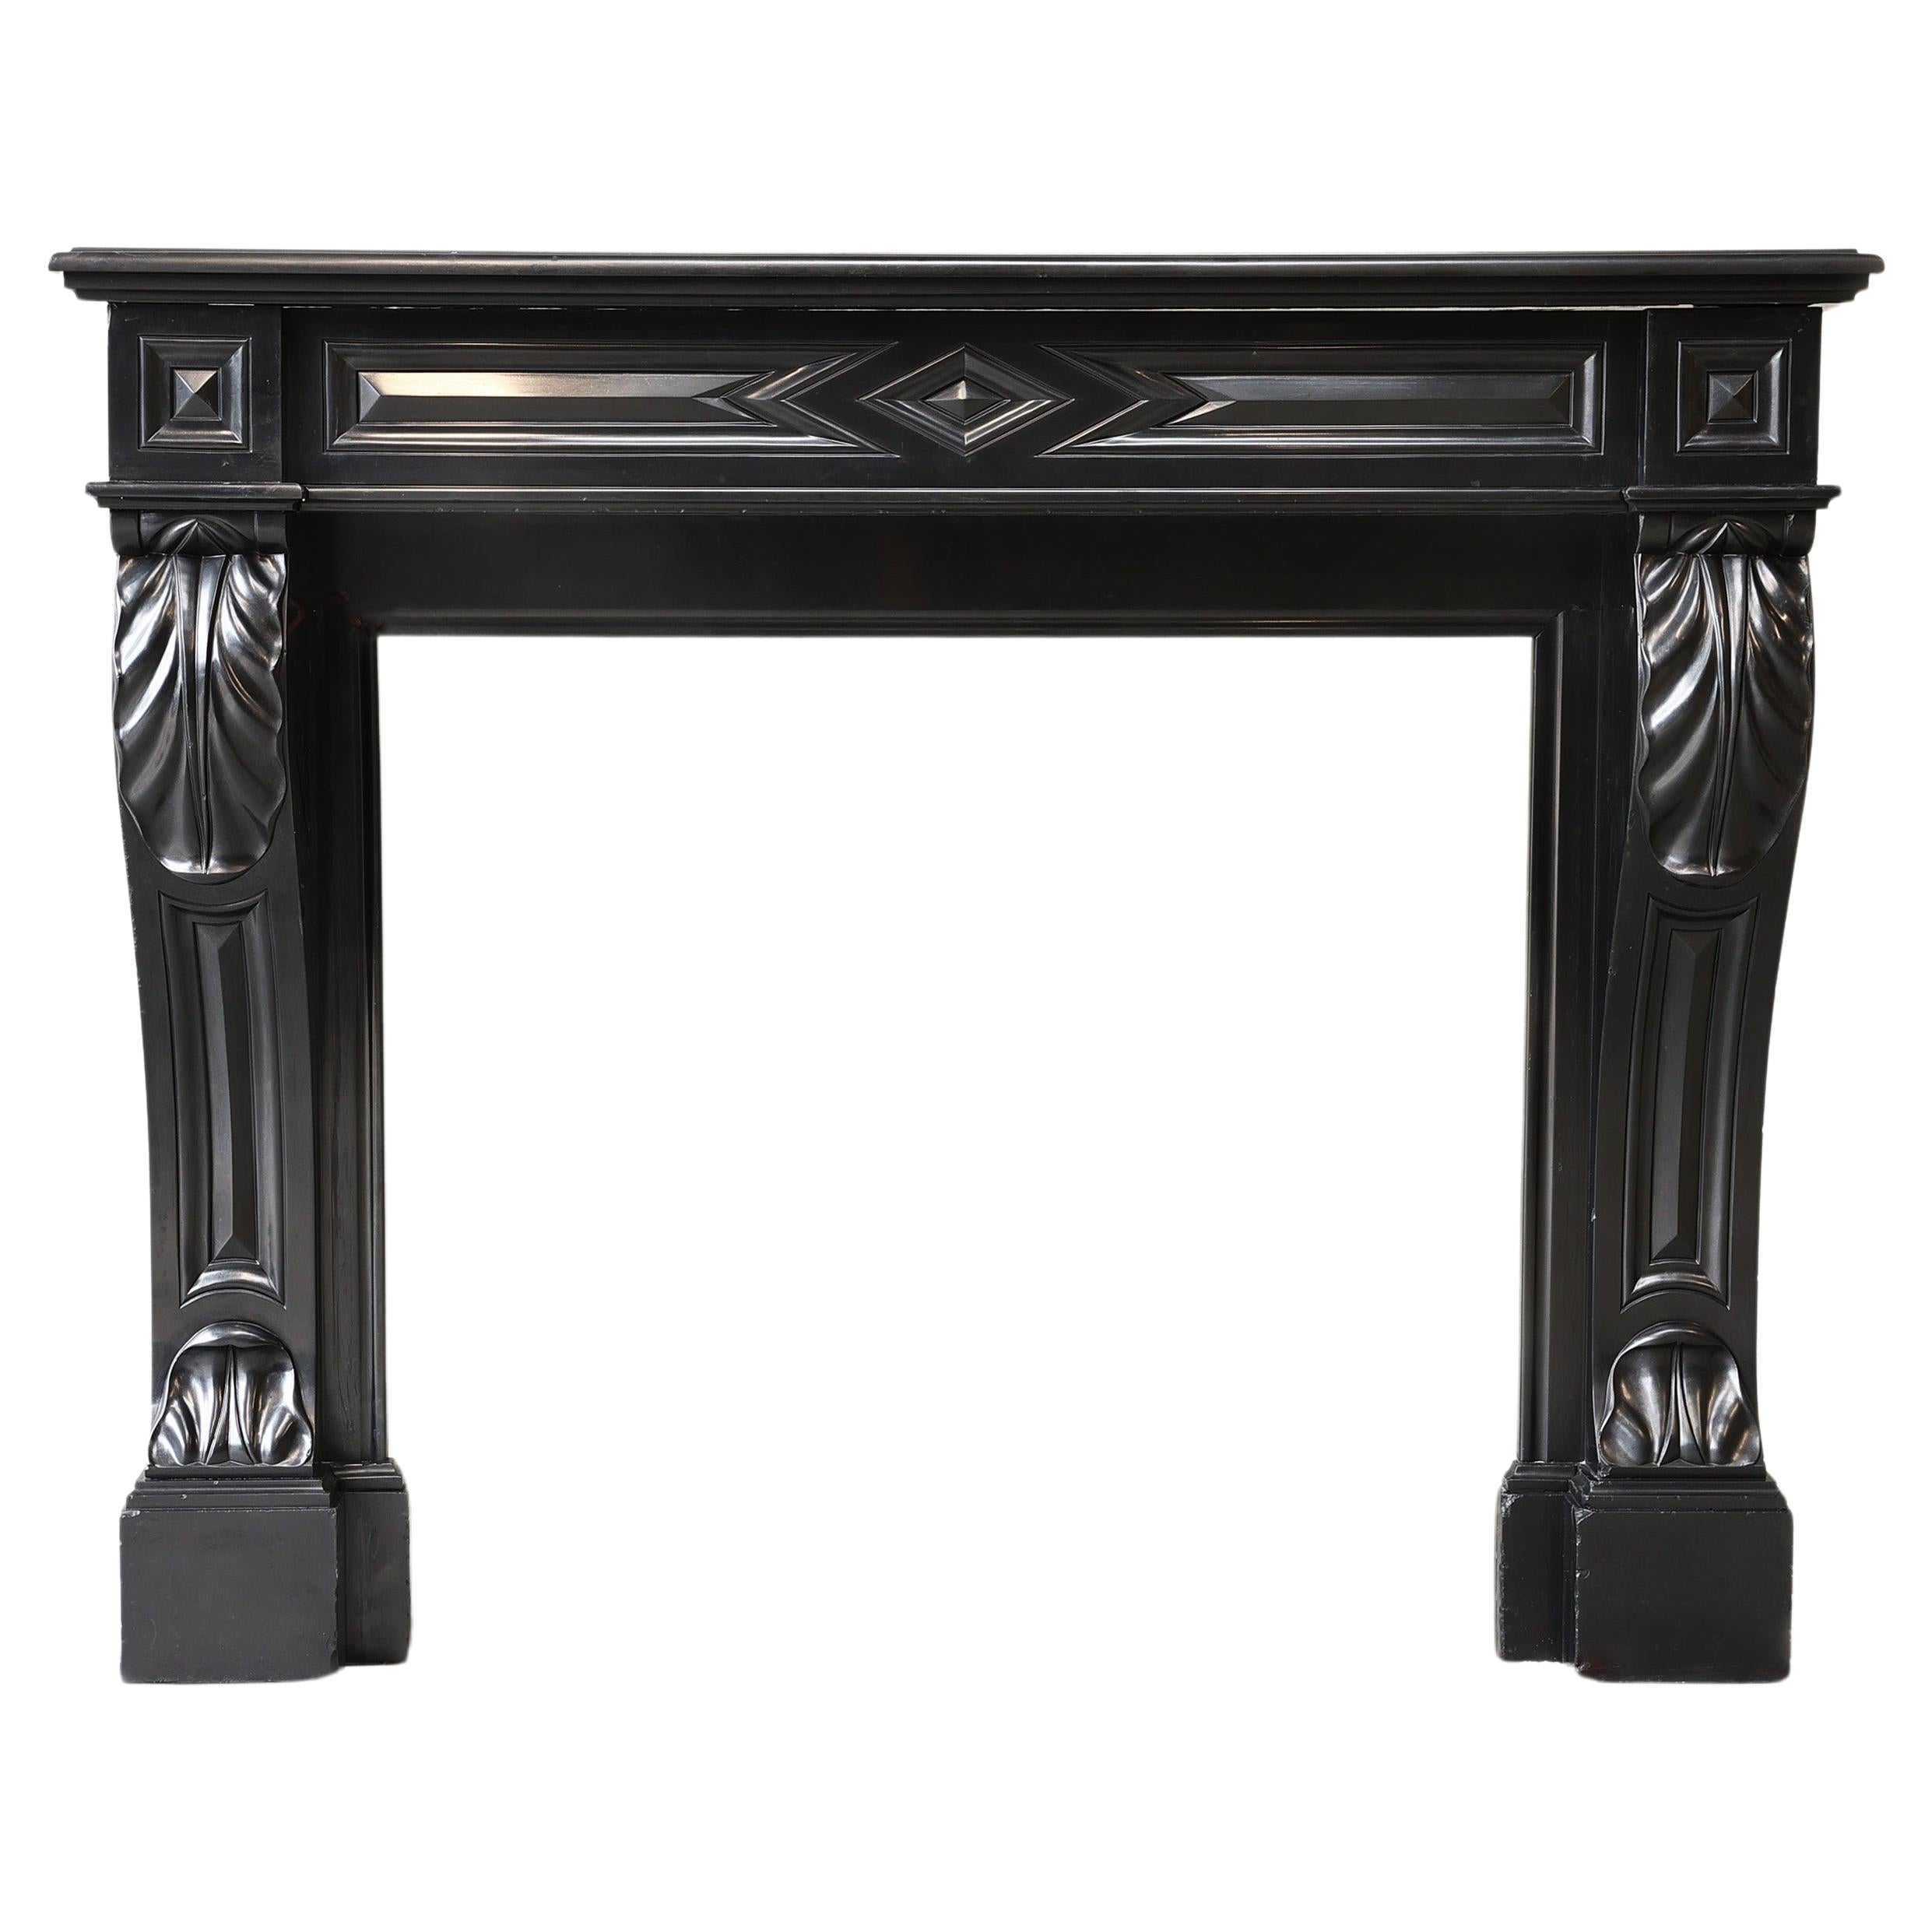 19th century fireplace in style of Louis XVI of Noir de Mazy marble For Sale